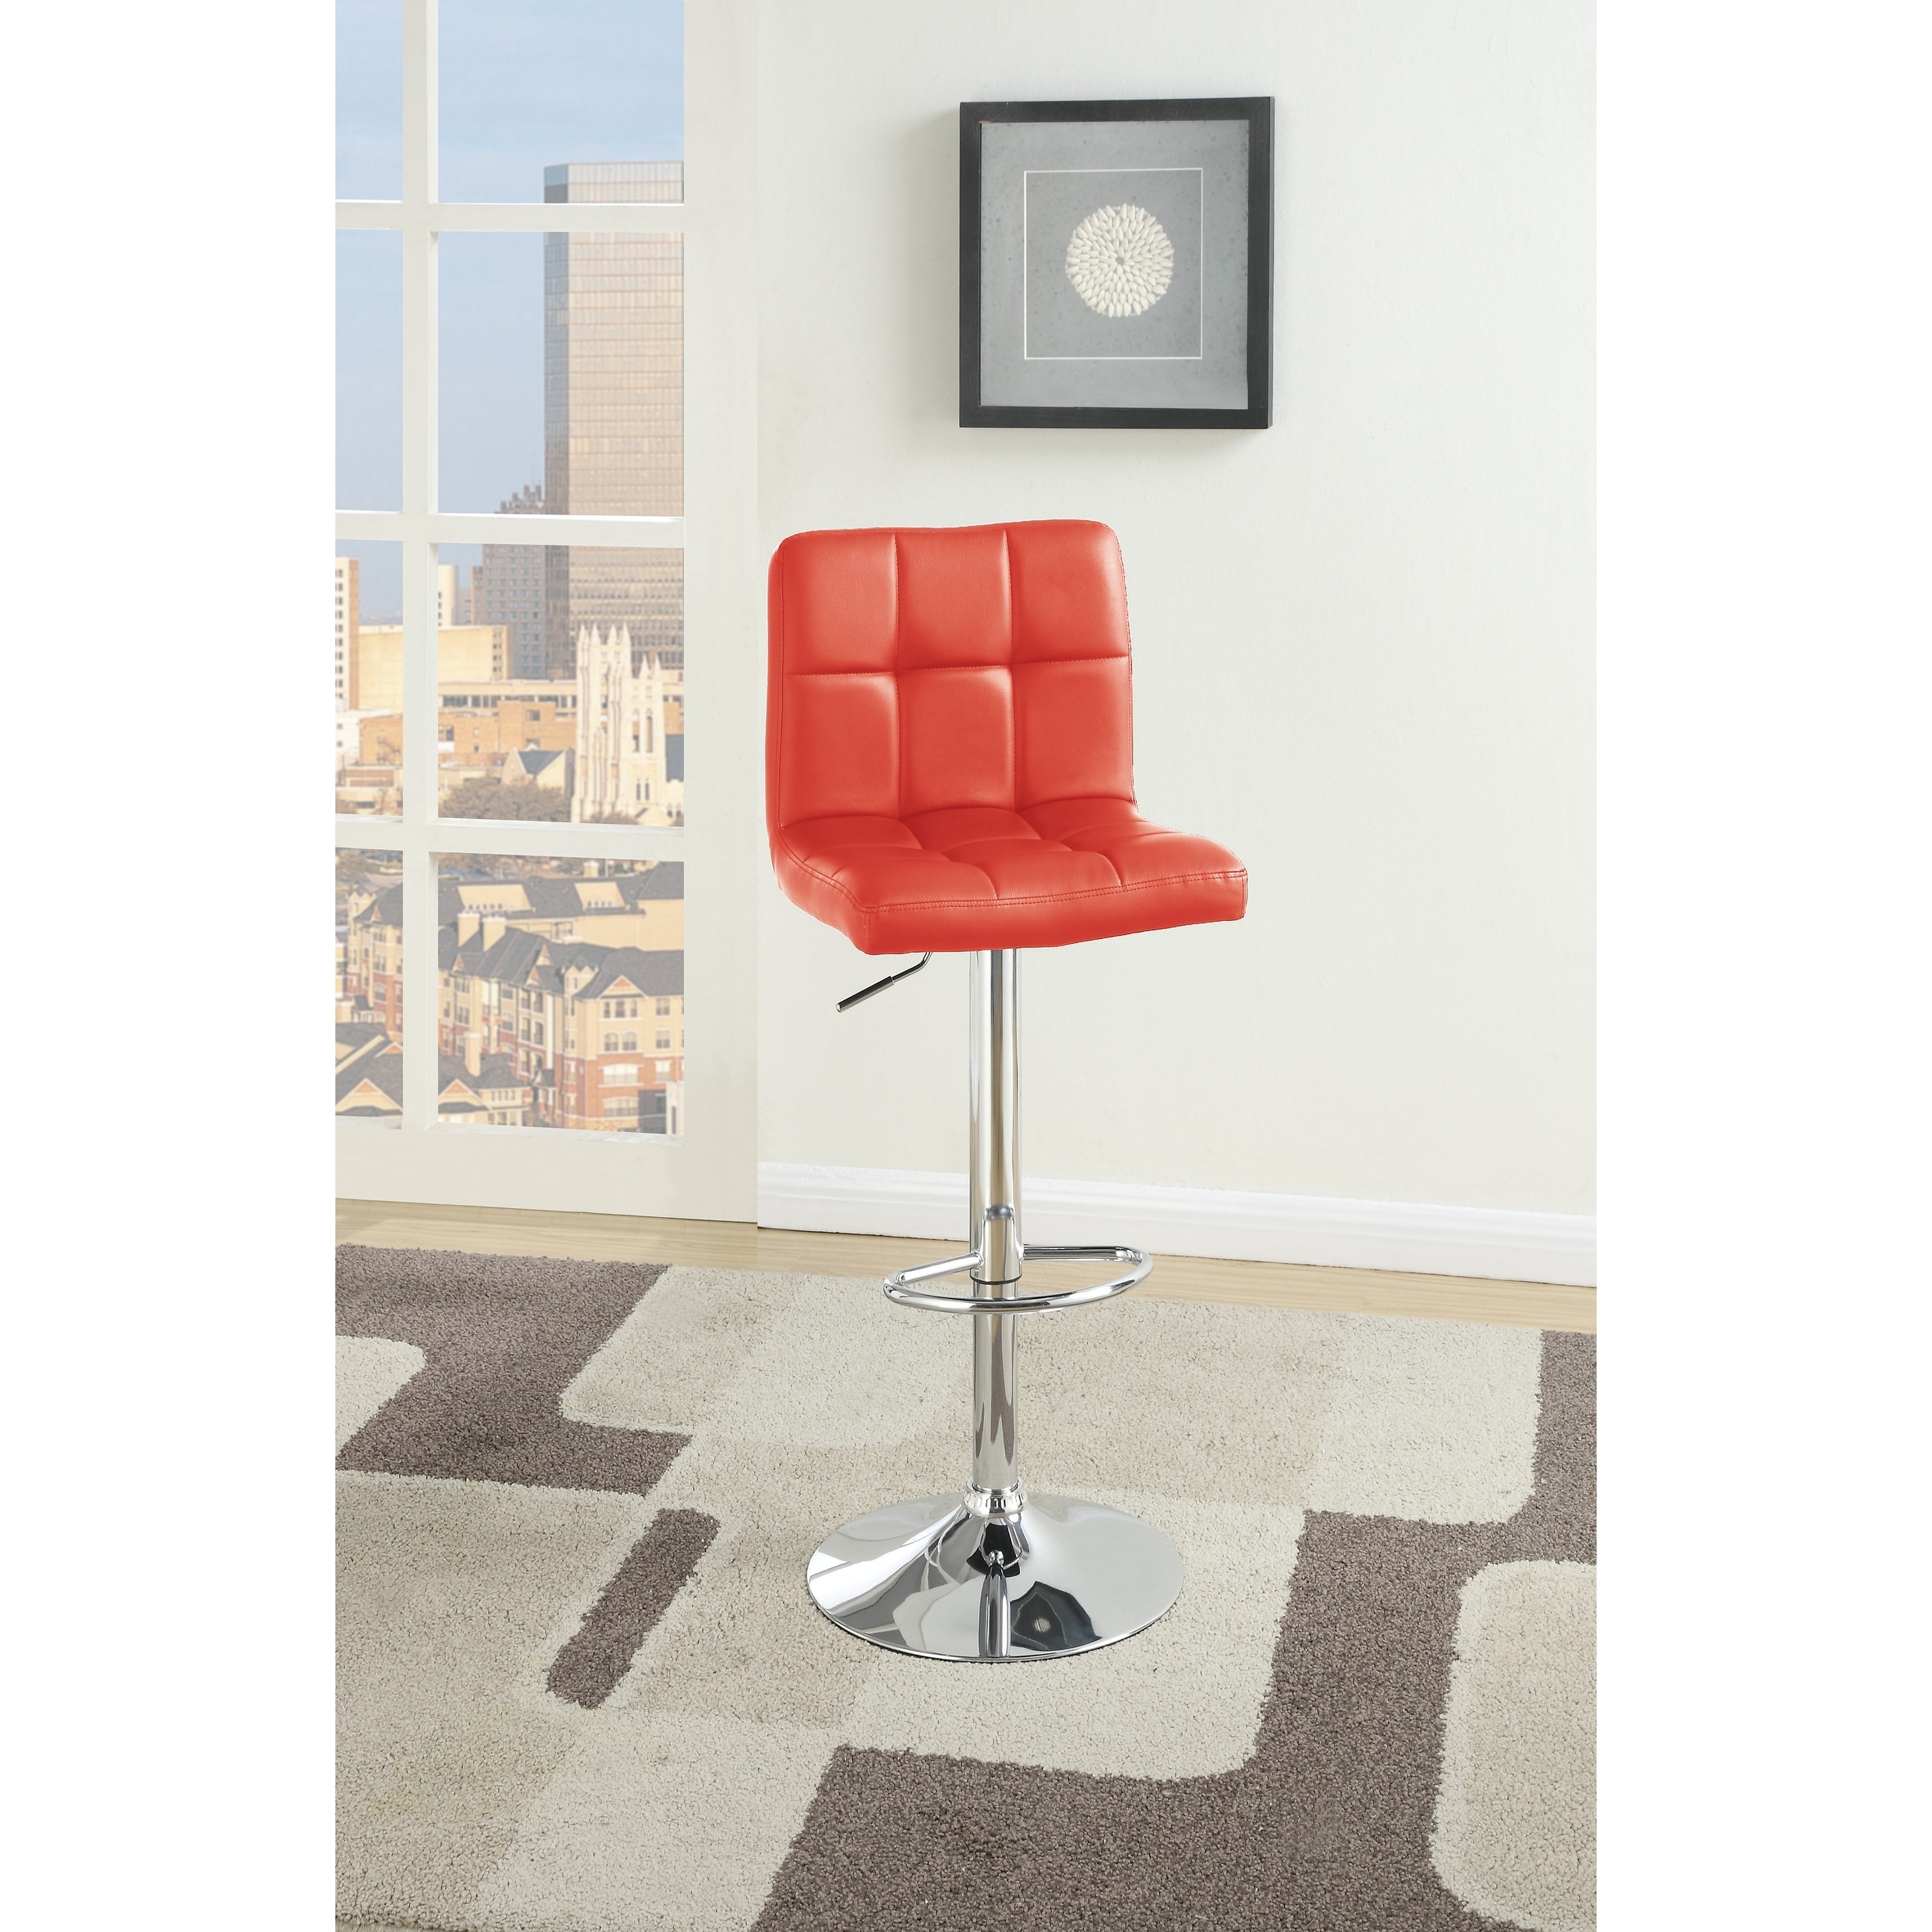 GREATPLANINC Red Bar Stool Counter Height Chairs Set of 2 Adjustable Height Swivel Stool